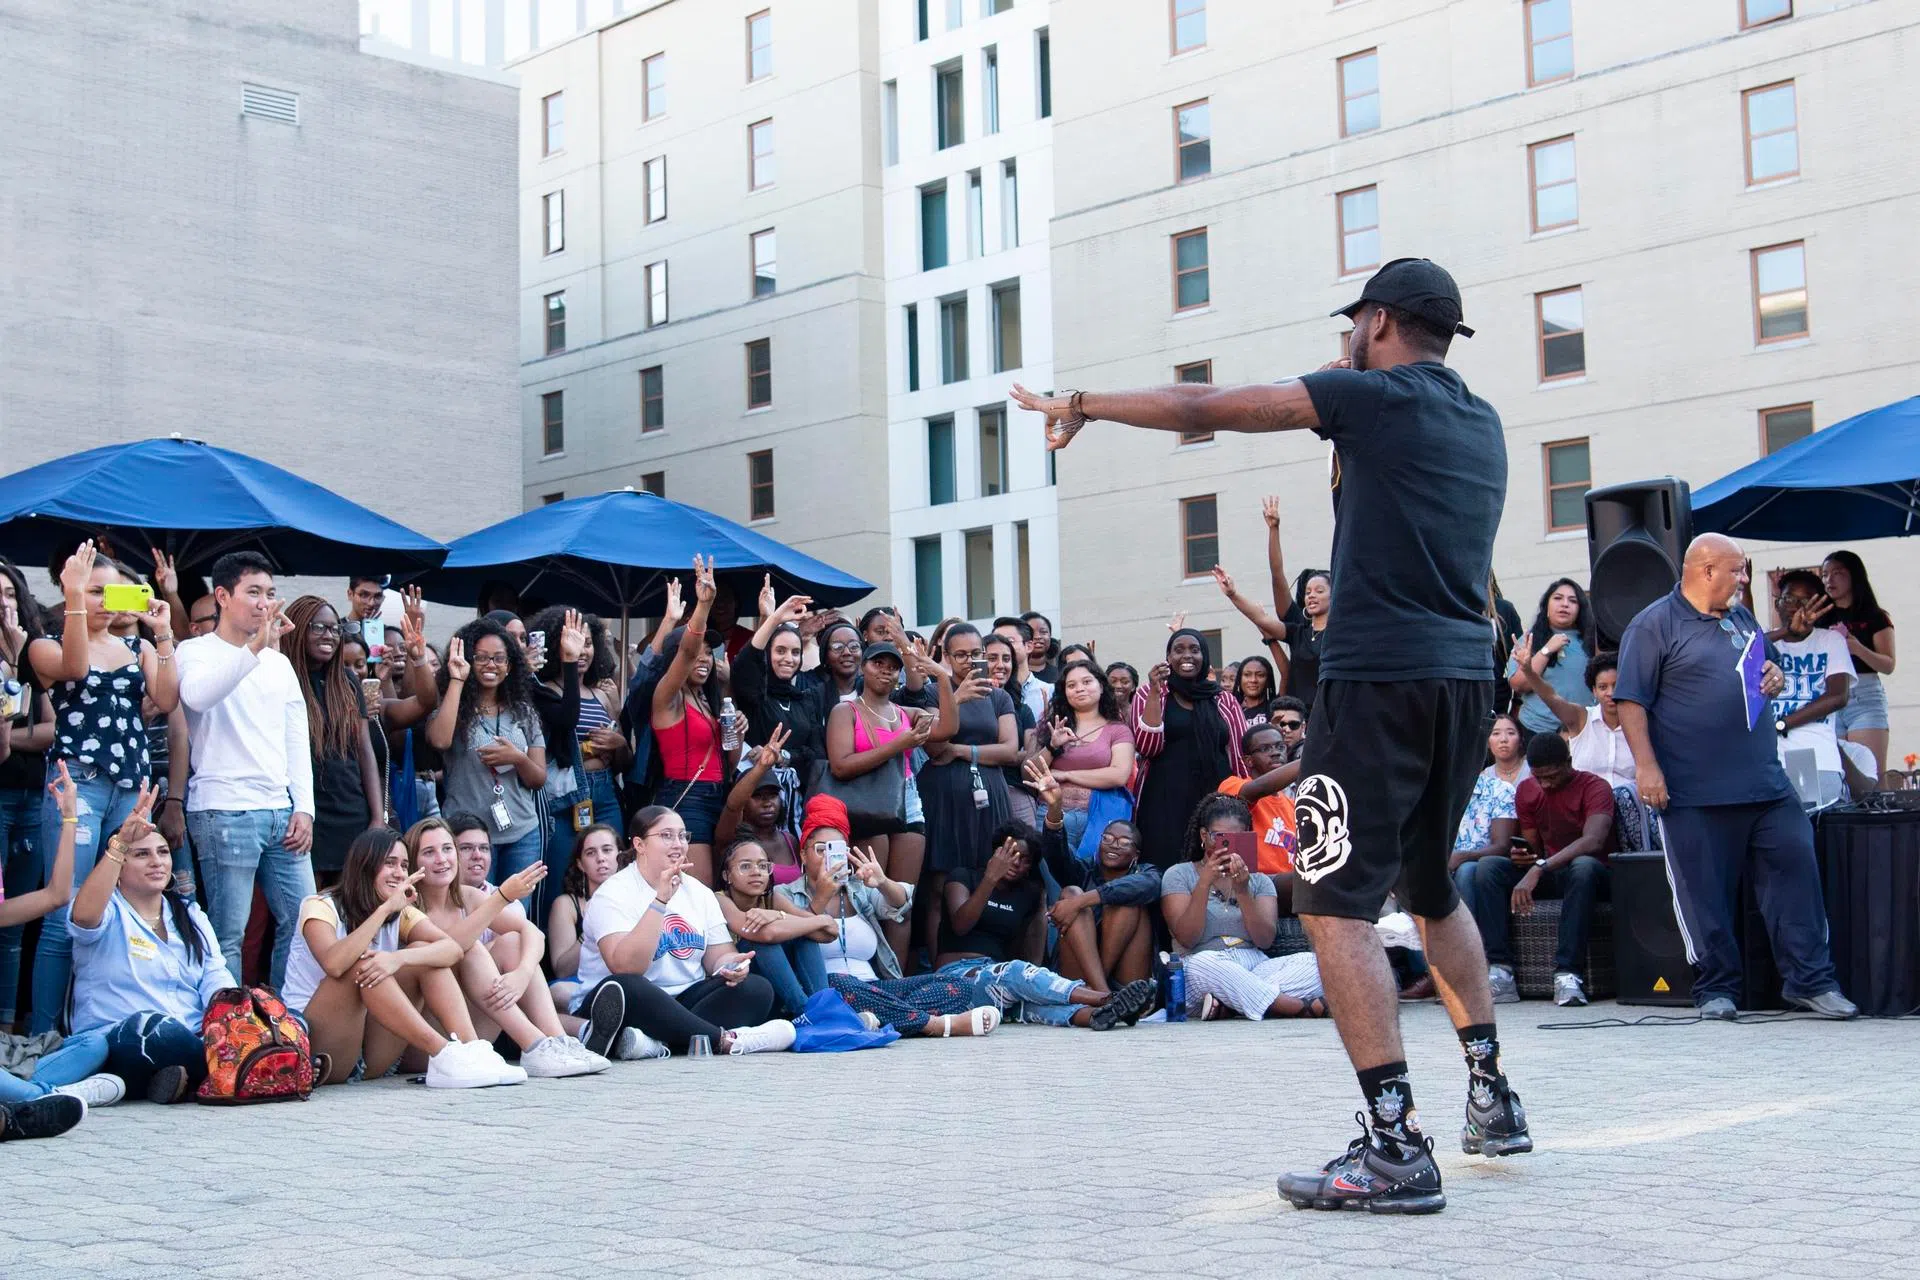 Students enjoy a performance during the MSSC Block Party